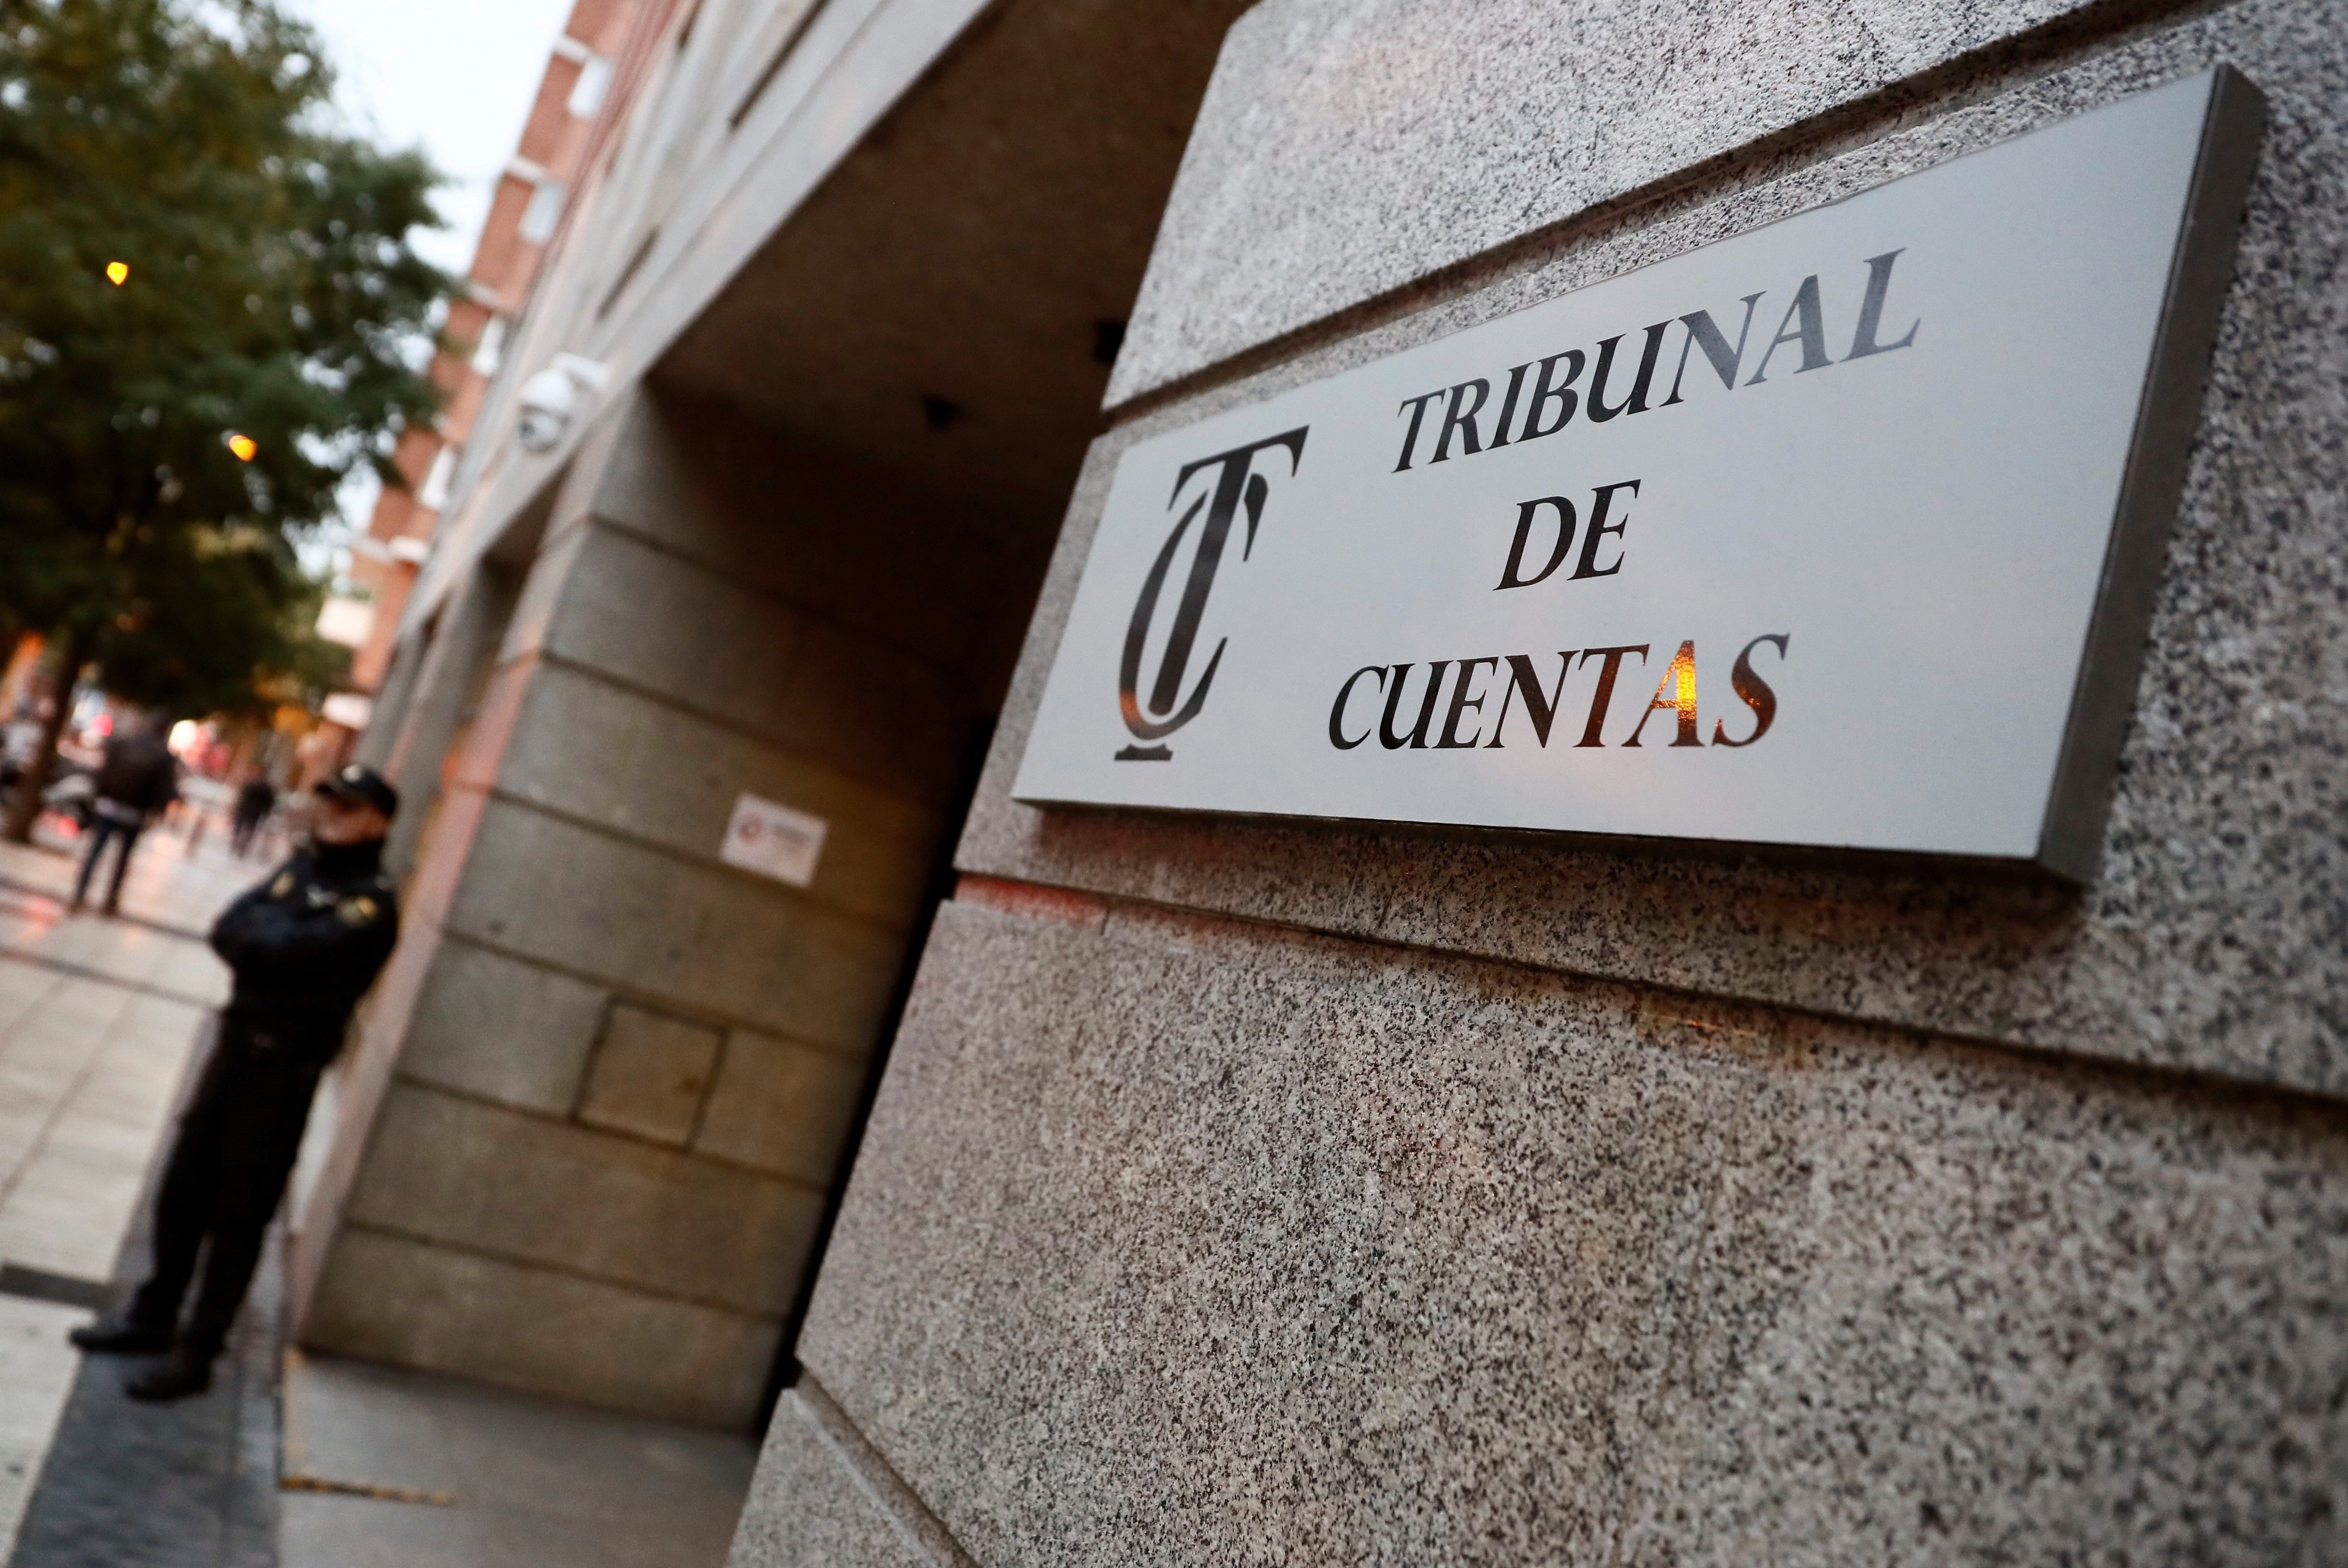 Court of Accounts case: Spanish state solicitors avoid issuing a report